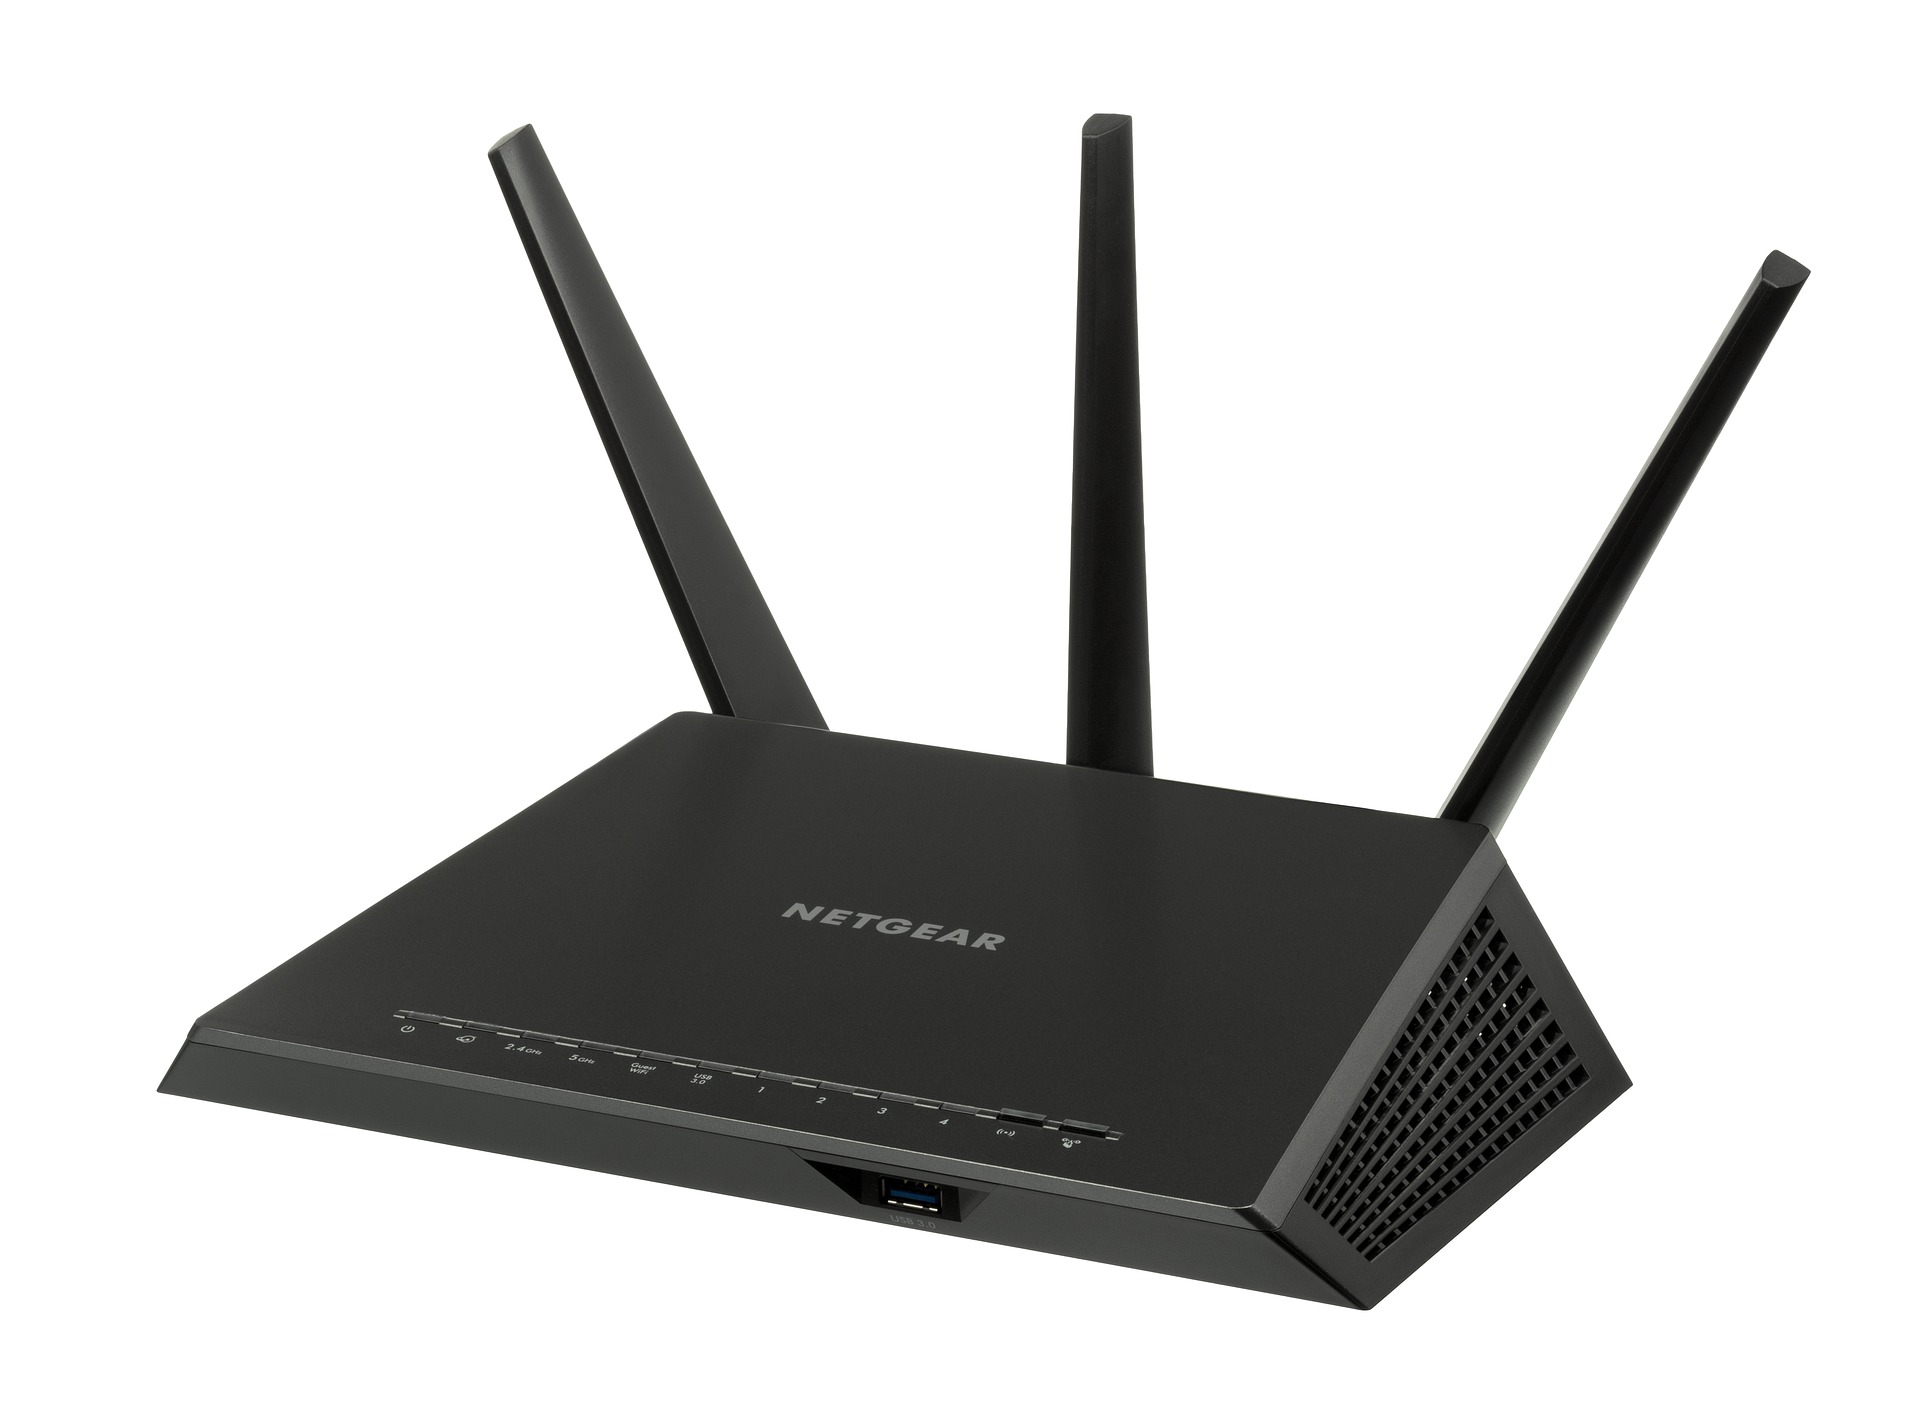 Netgear’s Smart Switches Affected by Multiple Vulnerabilities